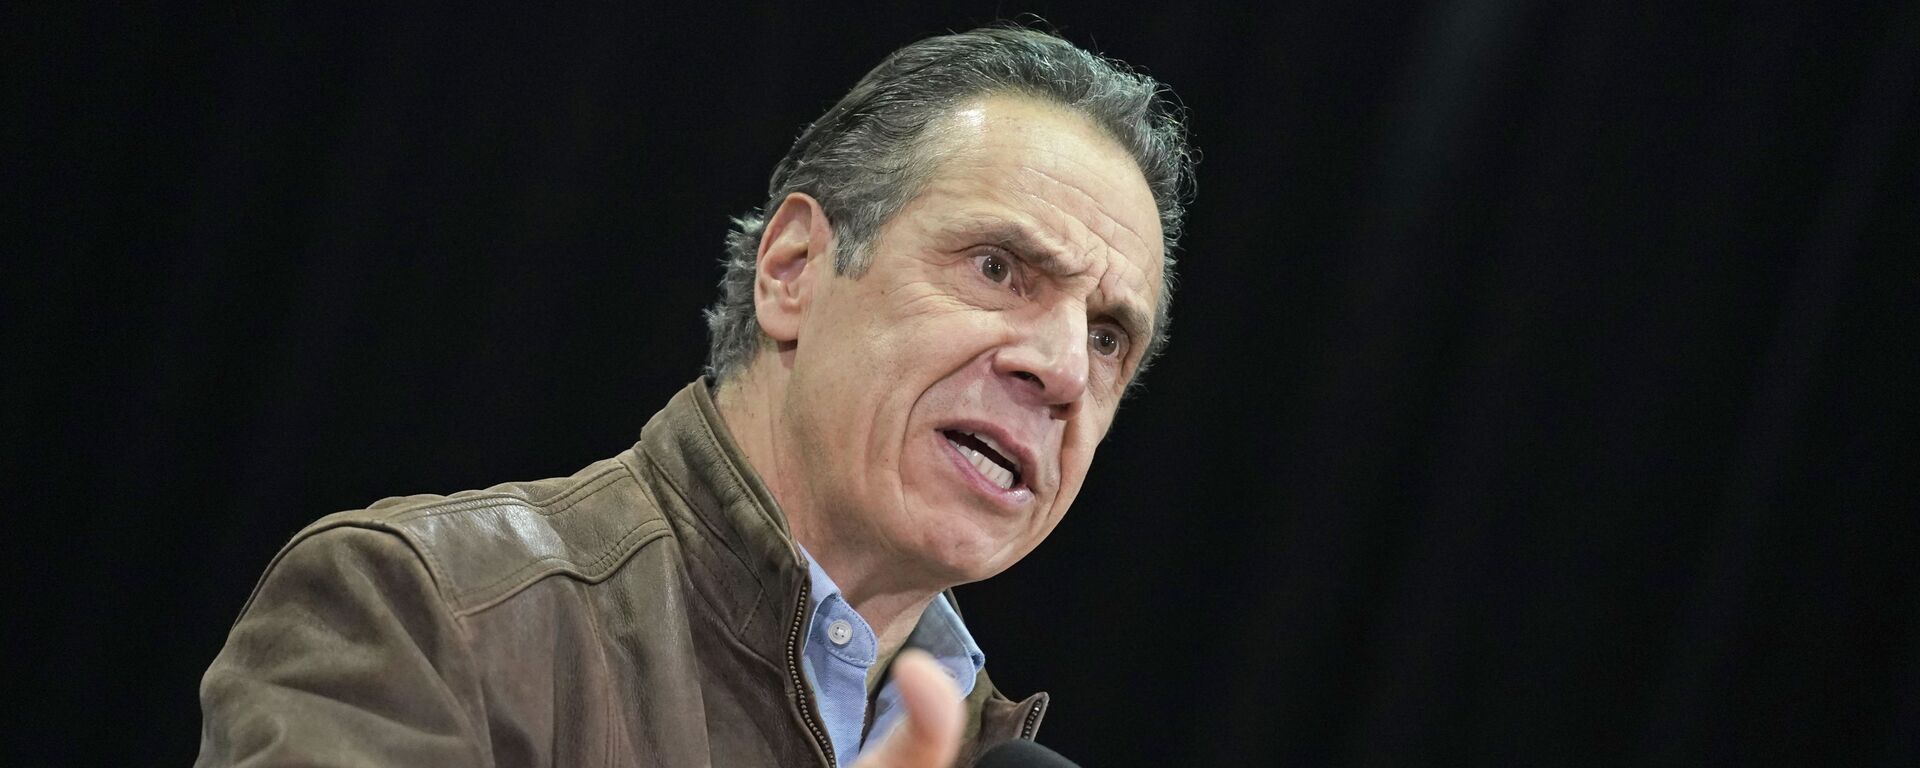 In this Wednesday, Feb. 24, 2021, file photo, New York Gov. Andrew Cuomo speaks during a press conference before the opening of a mass COVID-19 vaccination site in the Queens borough of New York. - Sputnik International, 1920, 01.03.2021